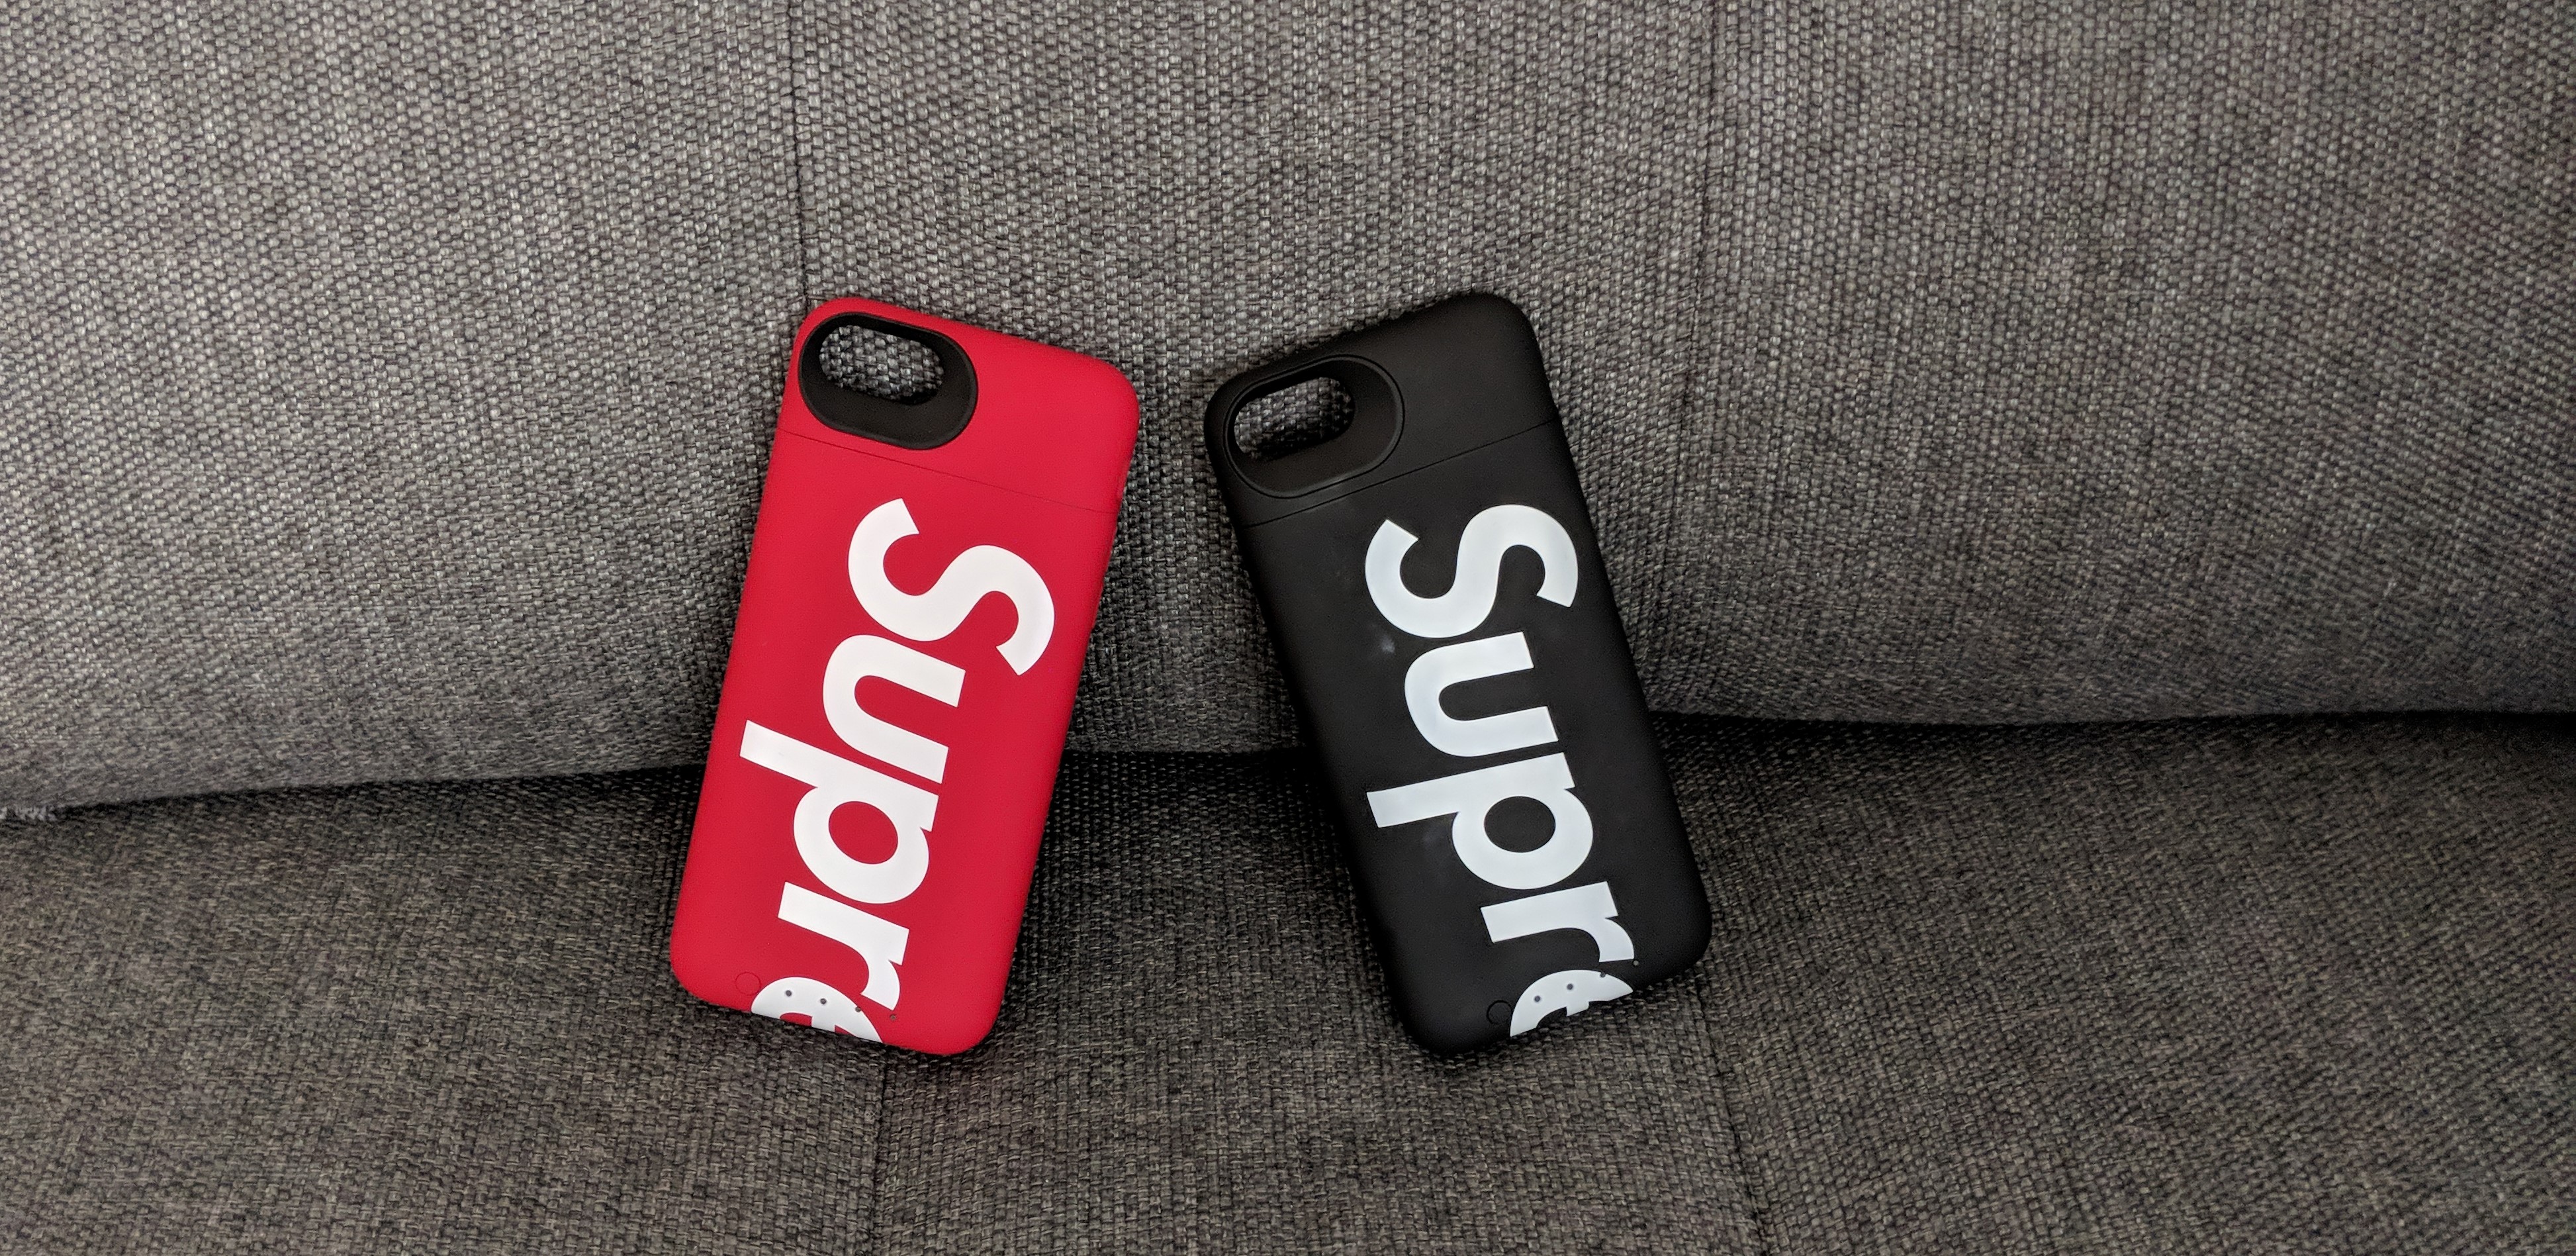 mophie X Supreme Juice Pack Air is available for your iPhone if you